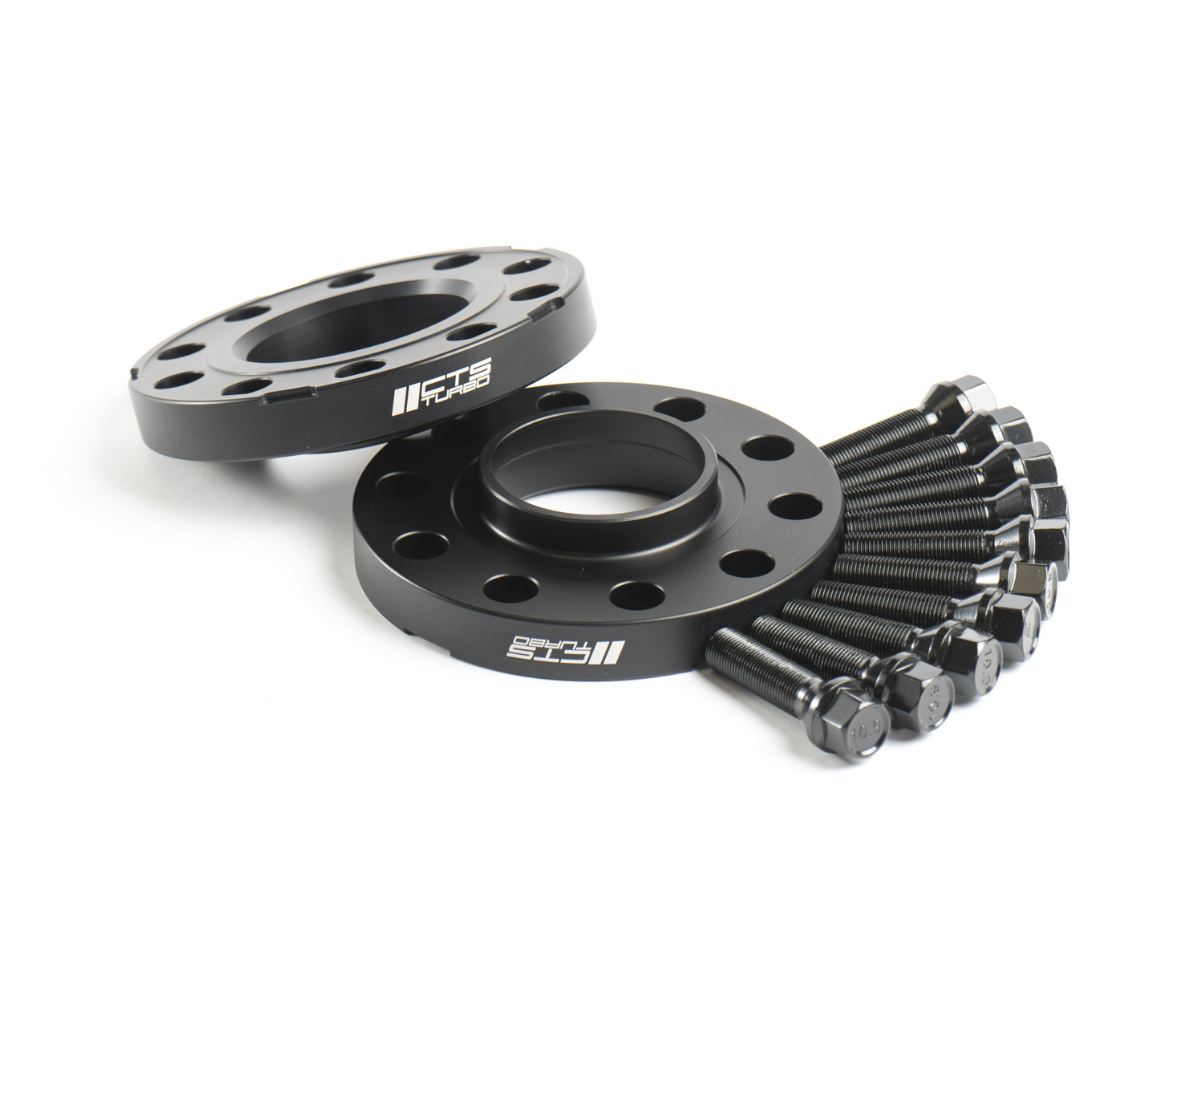 CTS Turbo Hubcentric Wheel Spacers With Lip - 5x120 72.5mm Hub (BMW F-Series)